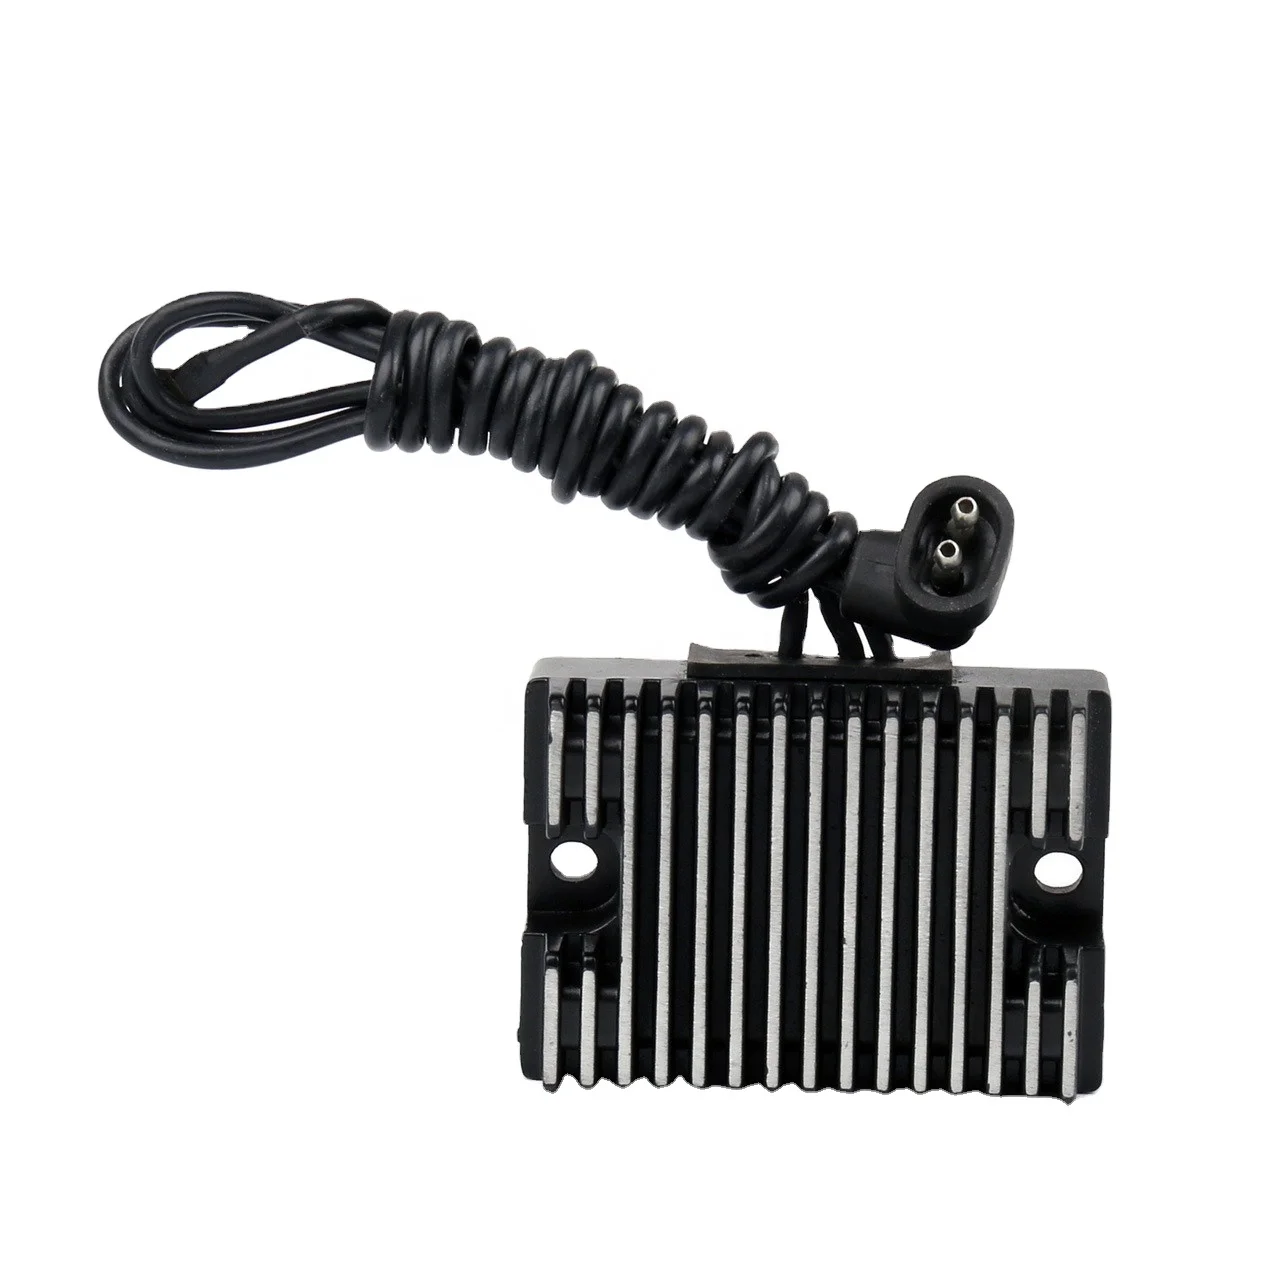 KOXIR Low Temperature MOSFET Voltage Regulator Rectifier Fit For Harley EVO 1989 1999 1340 Replace 74519 88 74519 88A